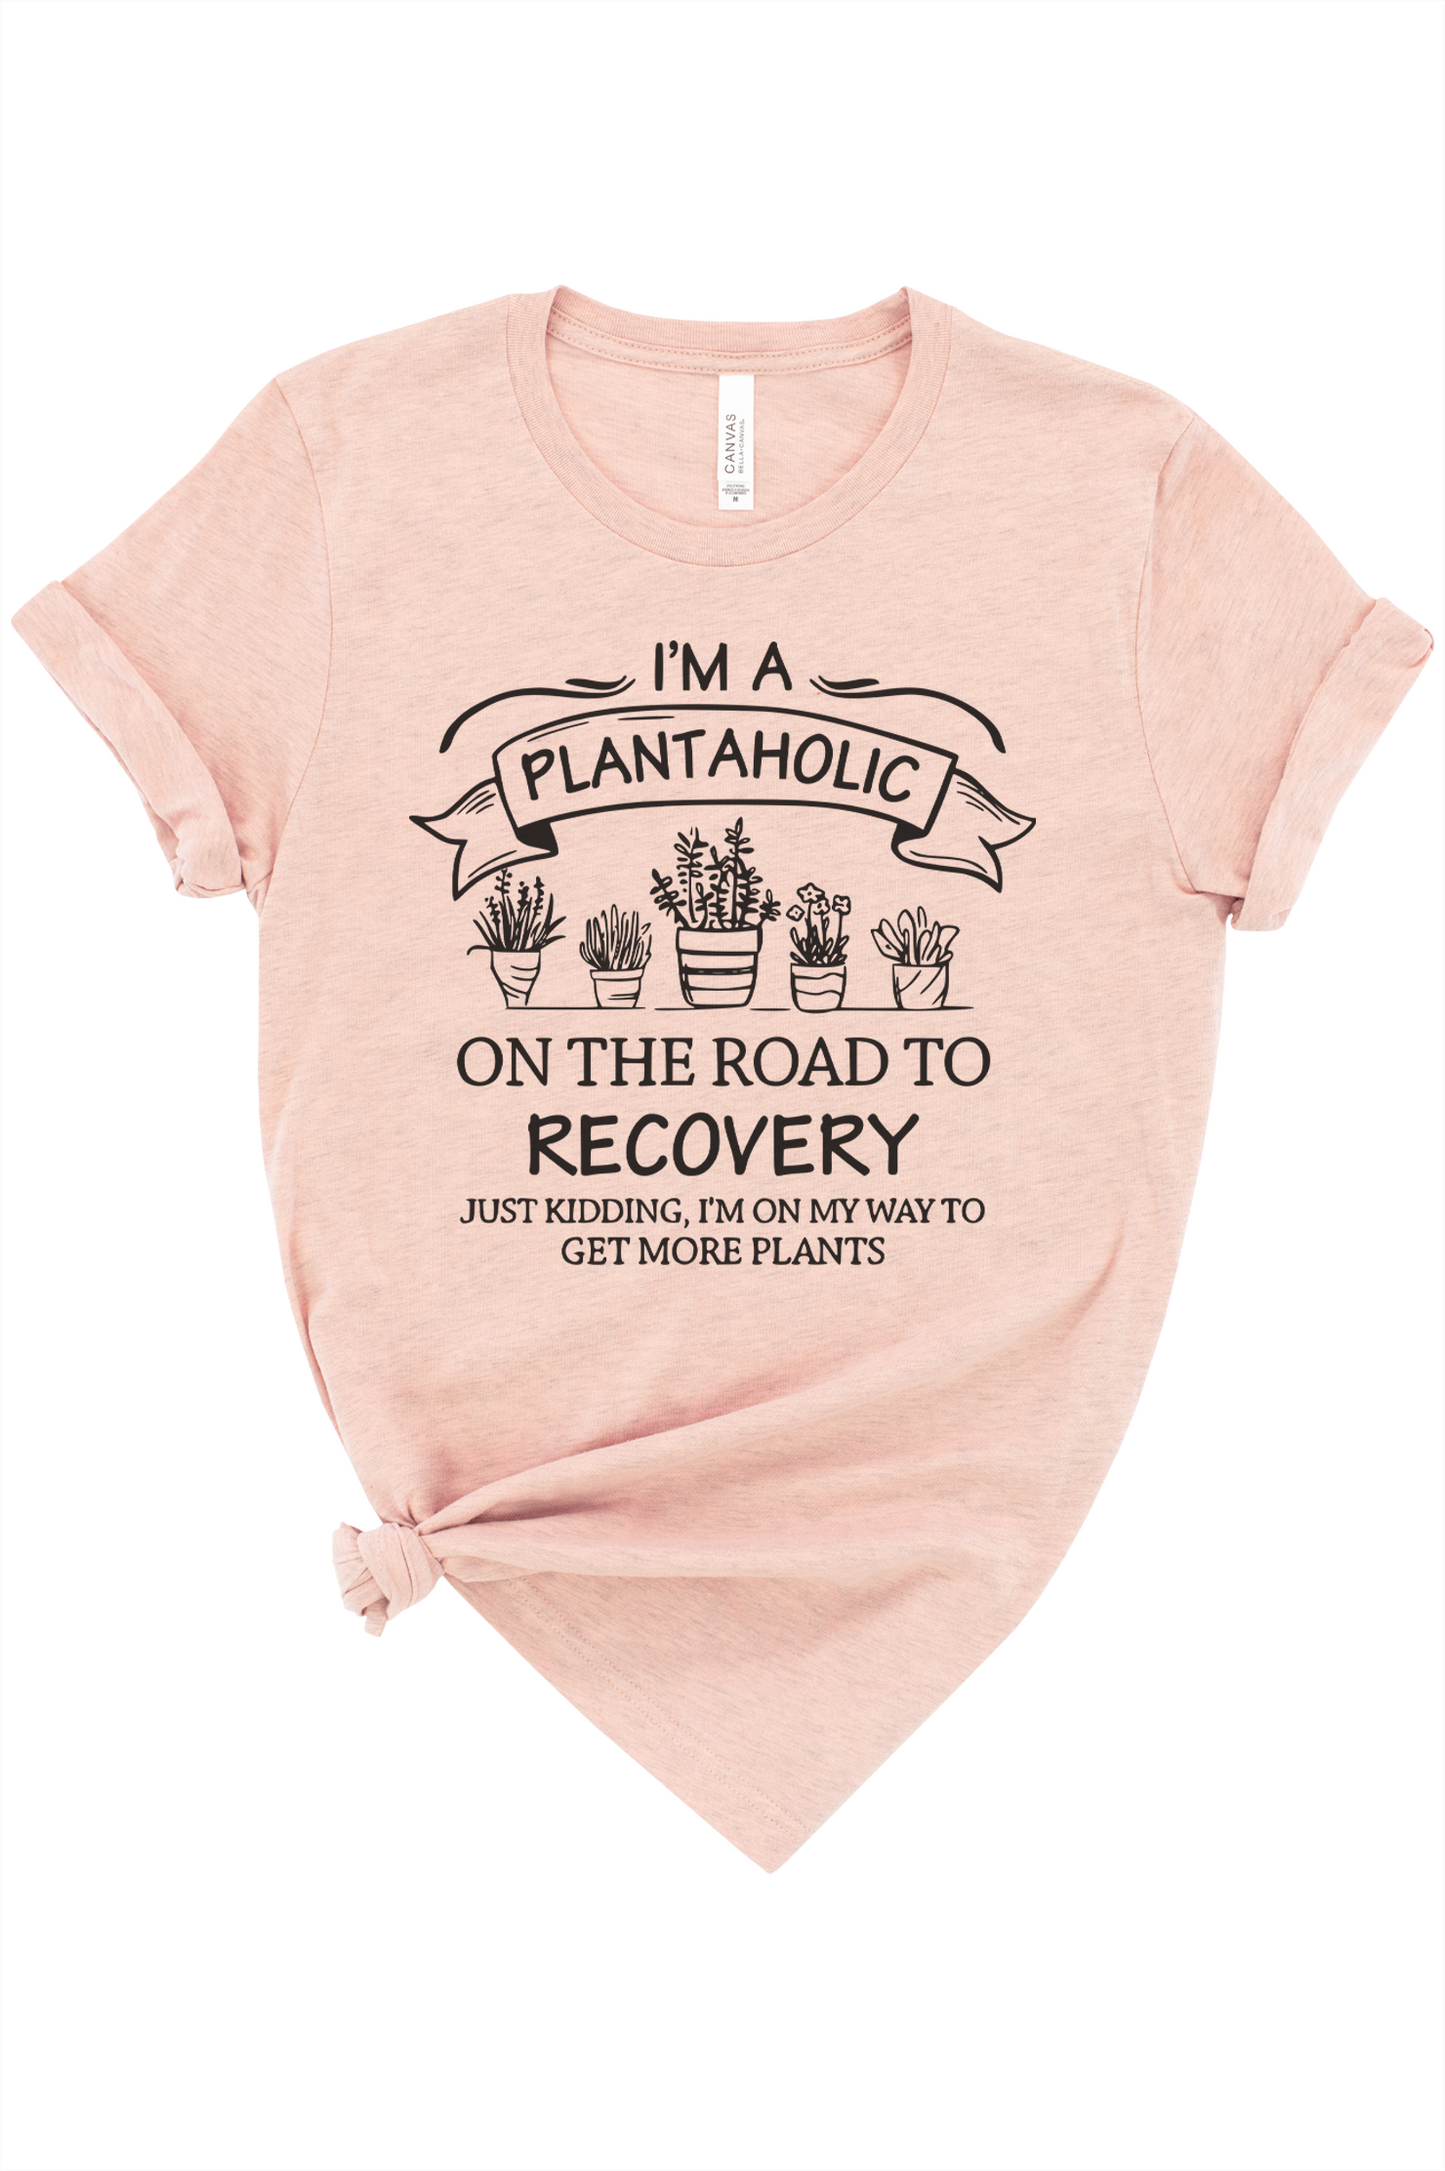 On the Road to Recovery Graphic Tee